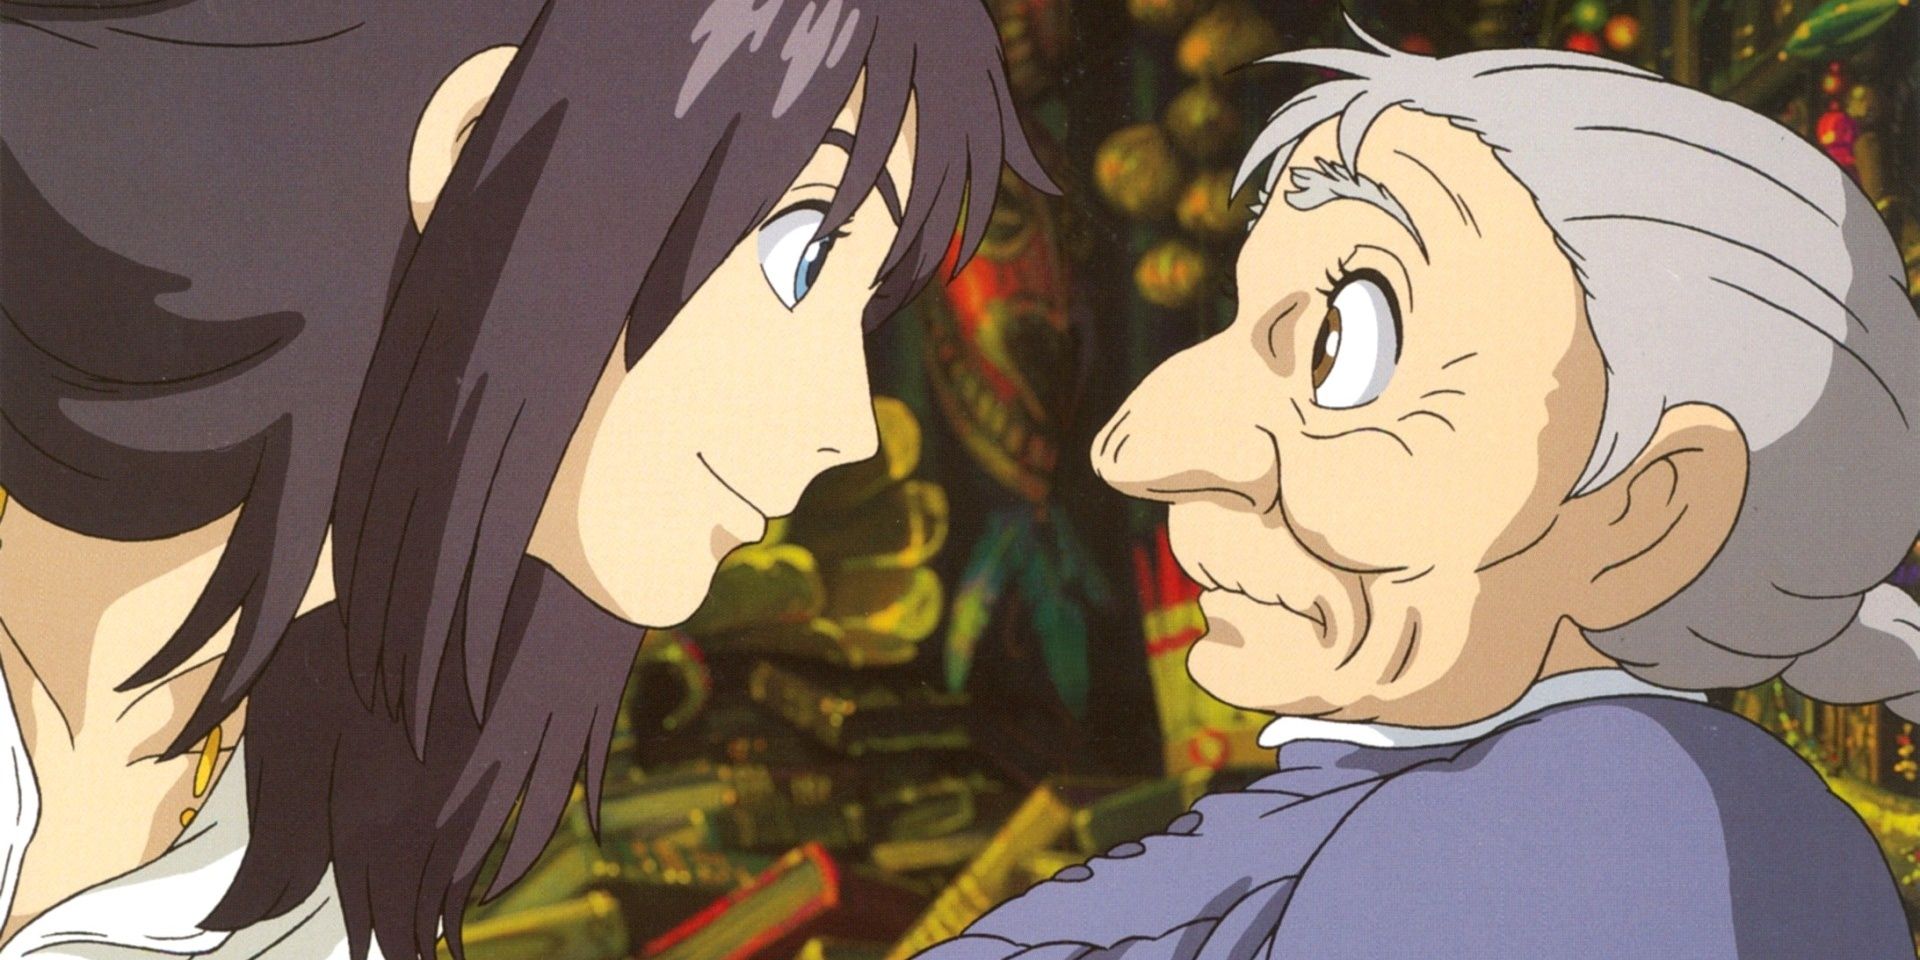 will there be another howls moving castle movie?